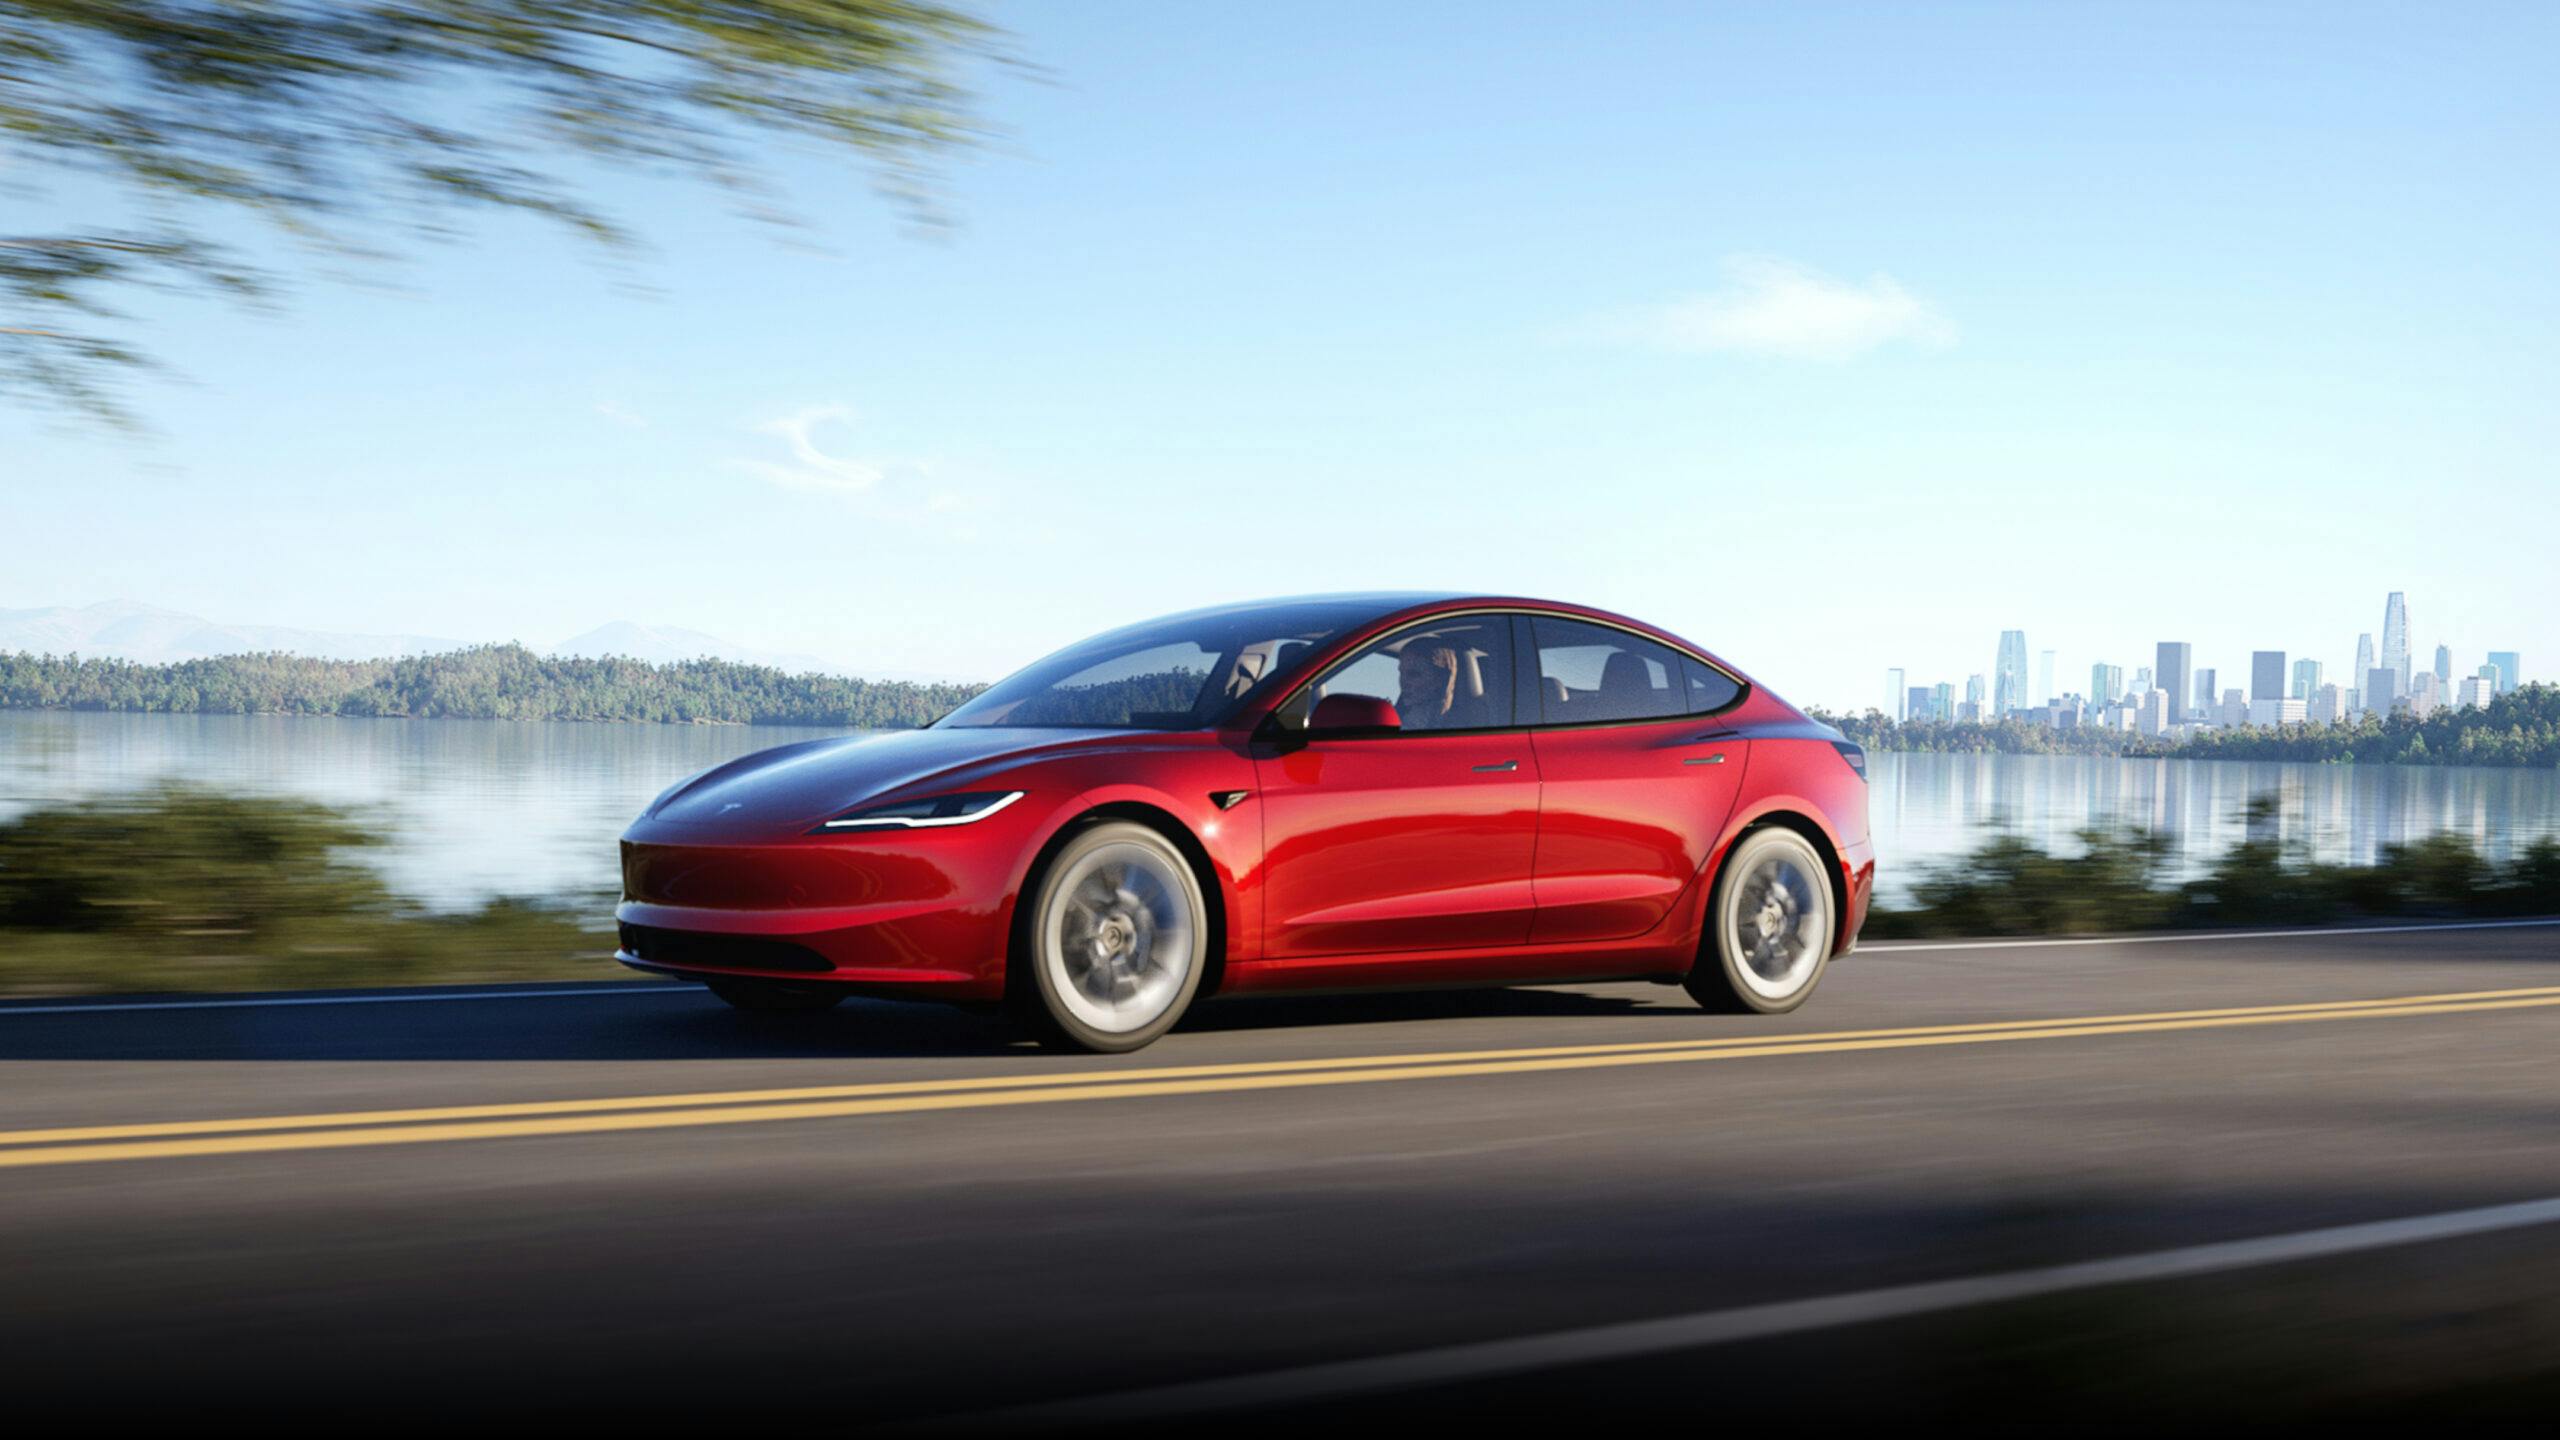 Tesla packs higher-end Model S and X features into Model 3 refresh